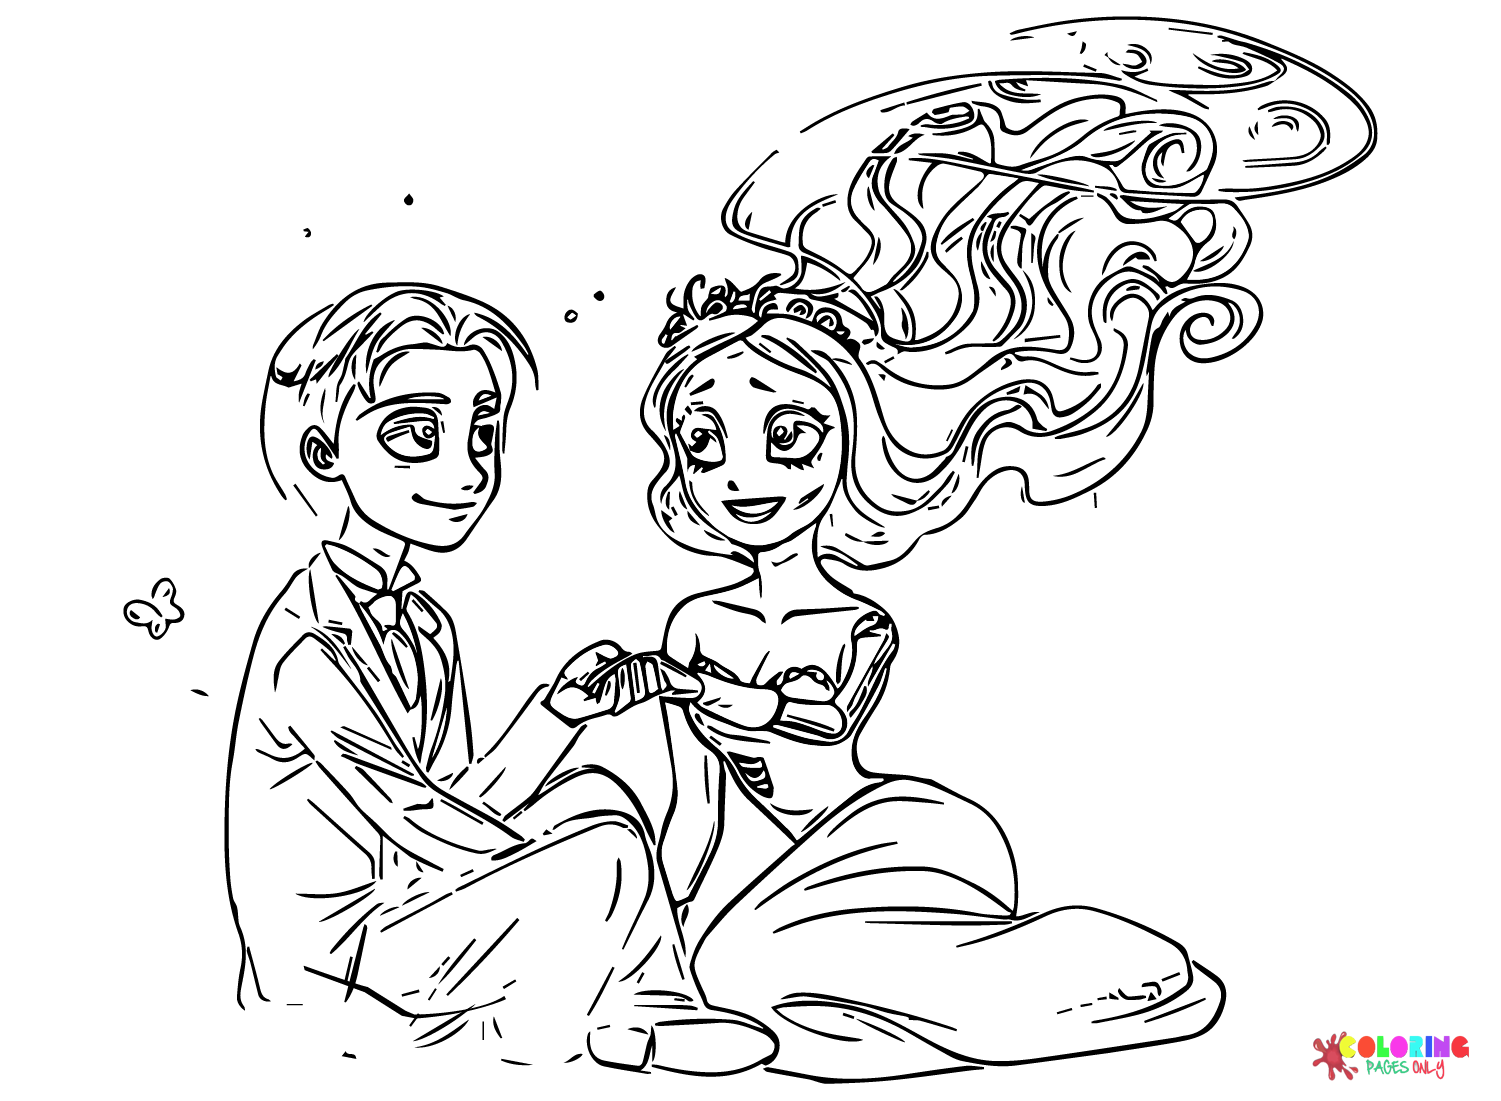 Victor and Emily Corpse Bride Coloring Page